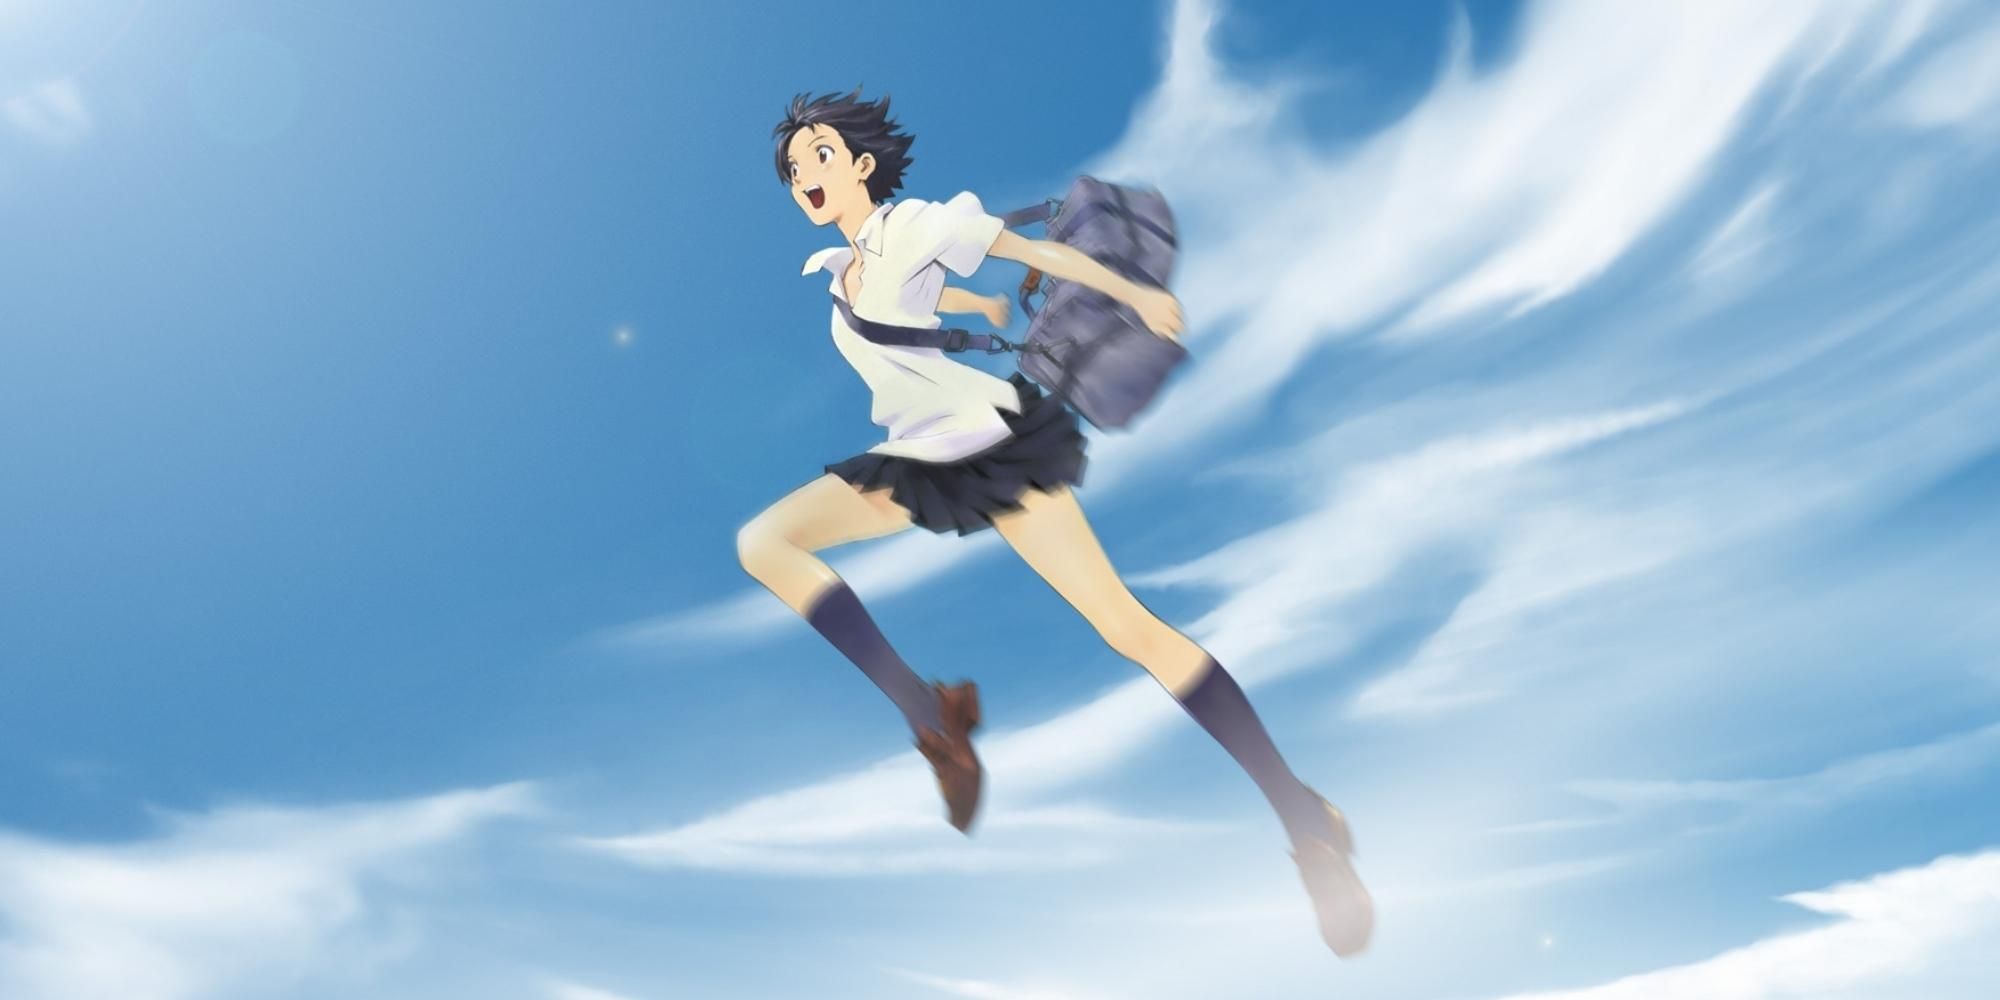 Makoto in The Girl Who Leapt Through Time